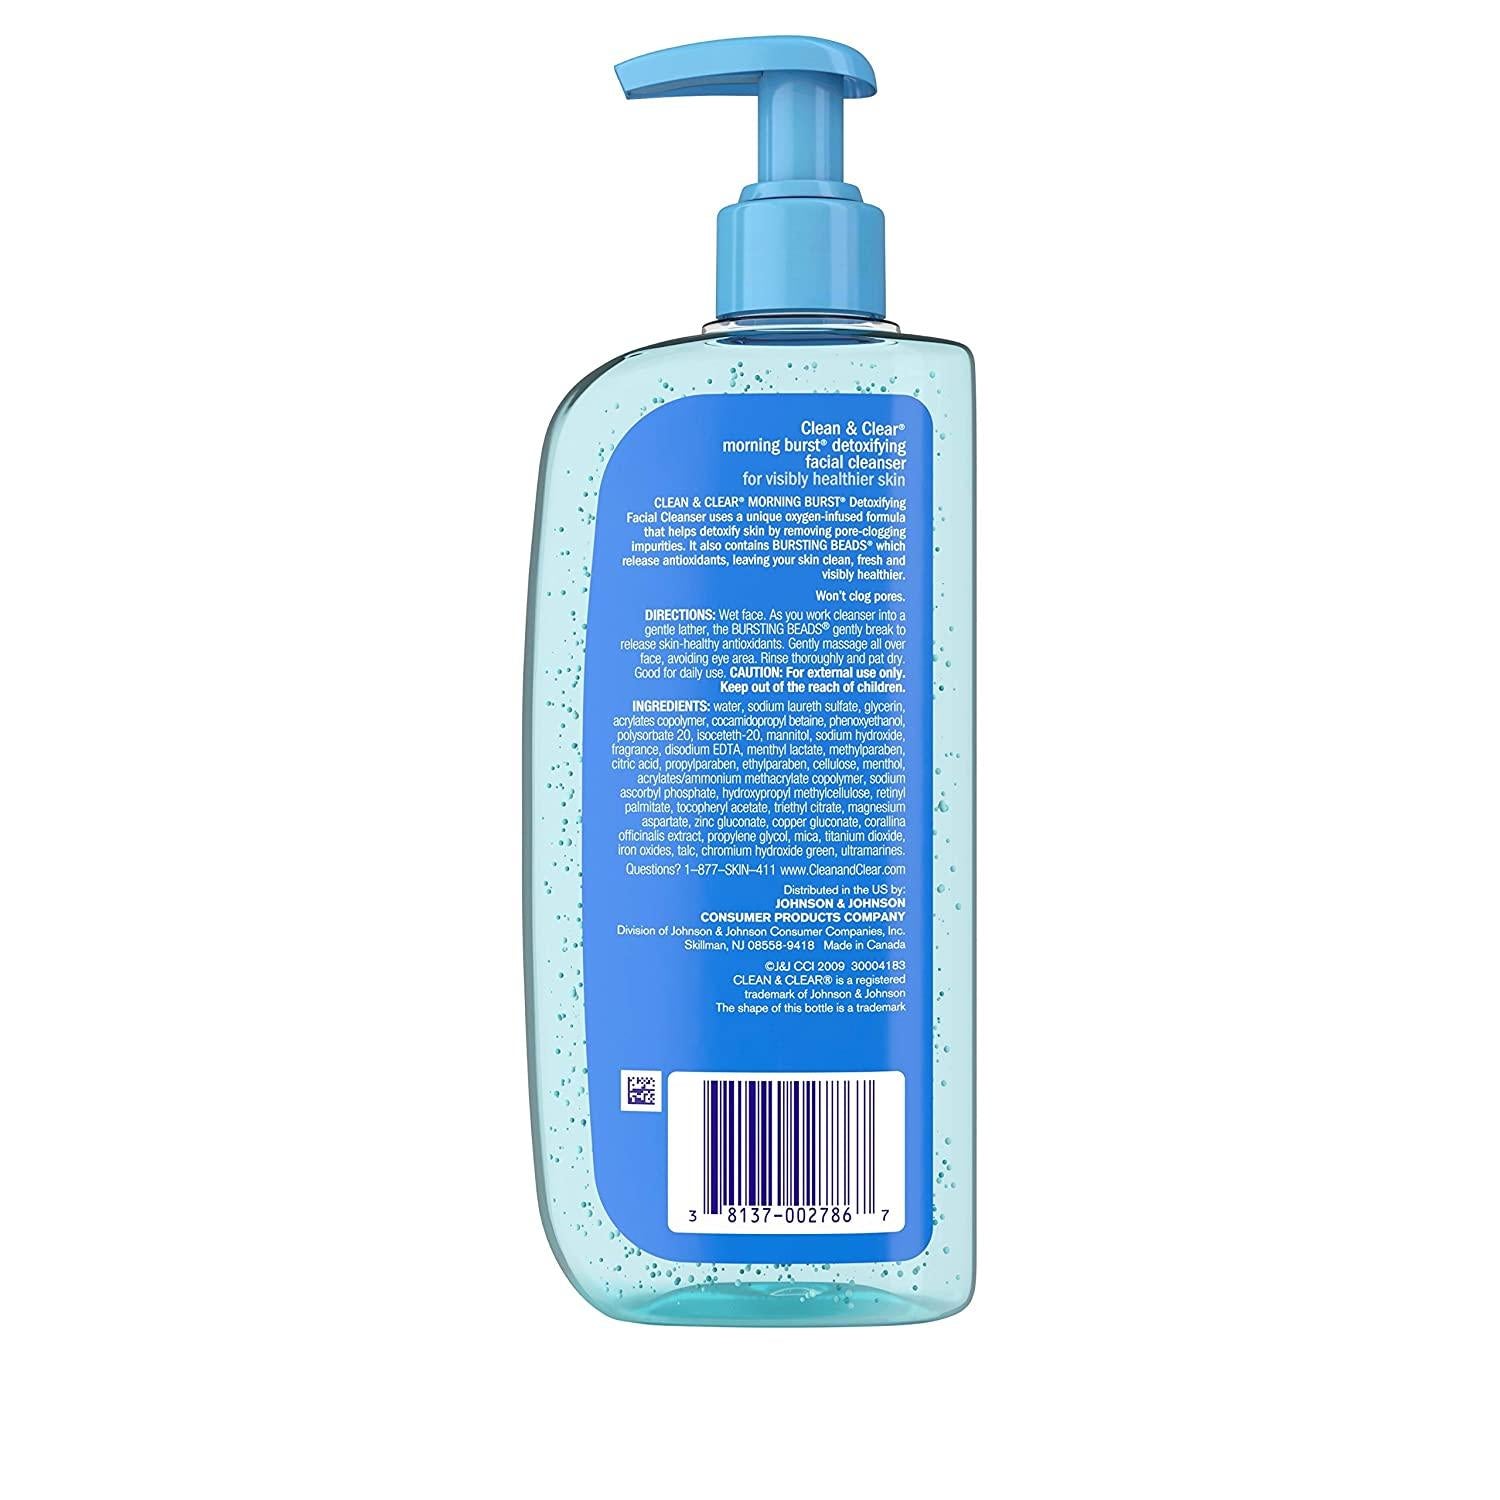 Clean and Clear Morning Burst Detoxifying Facial Cleanser - Brivane